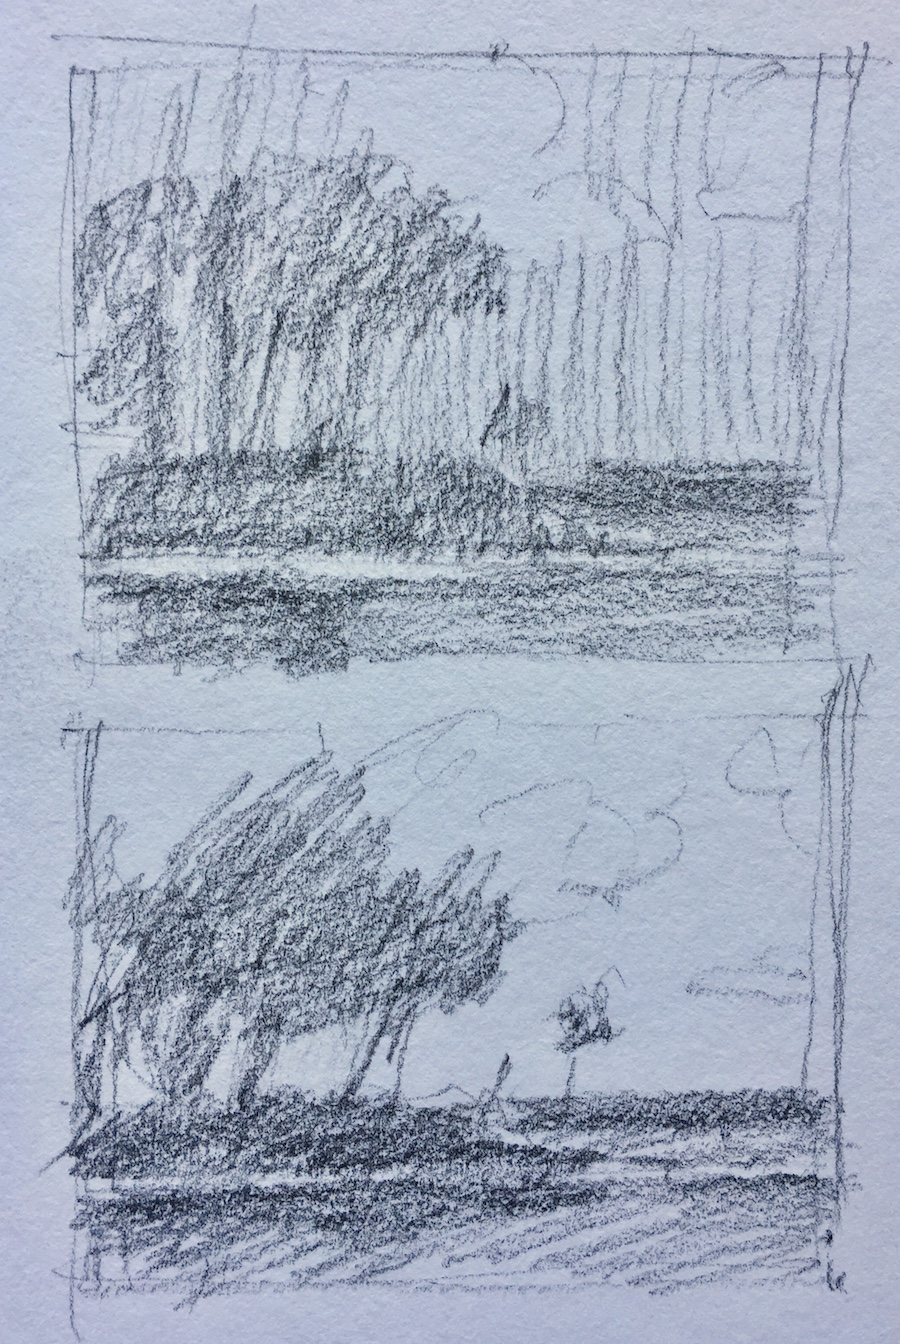 These thumbnails show a lovely view of the Big Rideau Lake in Ontario. It was simple, with a delightful pattern of trees against the sky. In the top one, I played with the idea of making the extremely blue sky a middle value, the same as the lake with white clouds and lakeshore being the only light values. The lower one keeps the whole sky in the light value. I also put more emphasis on the small tree in the lower thumbnail.